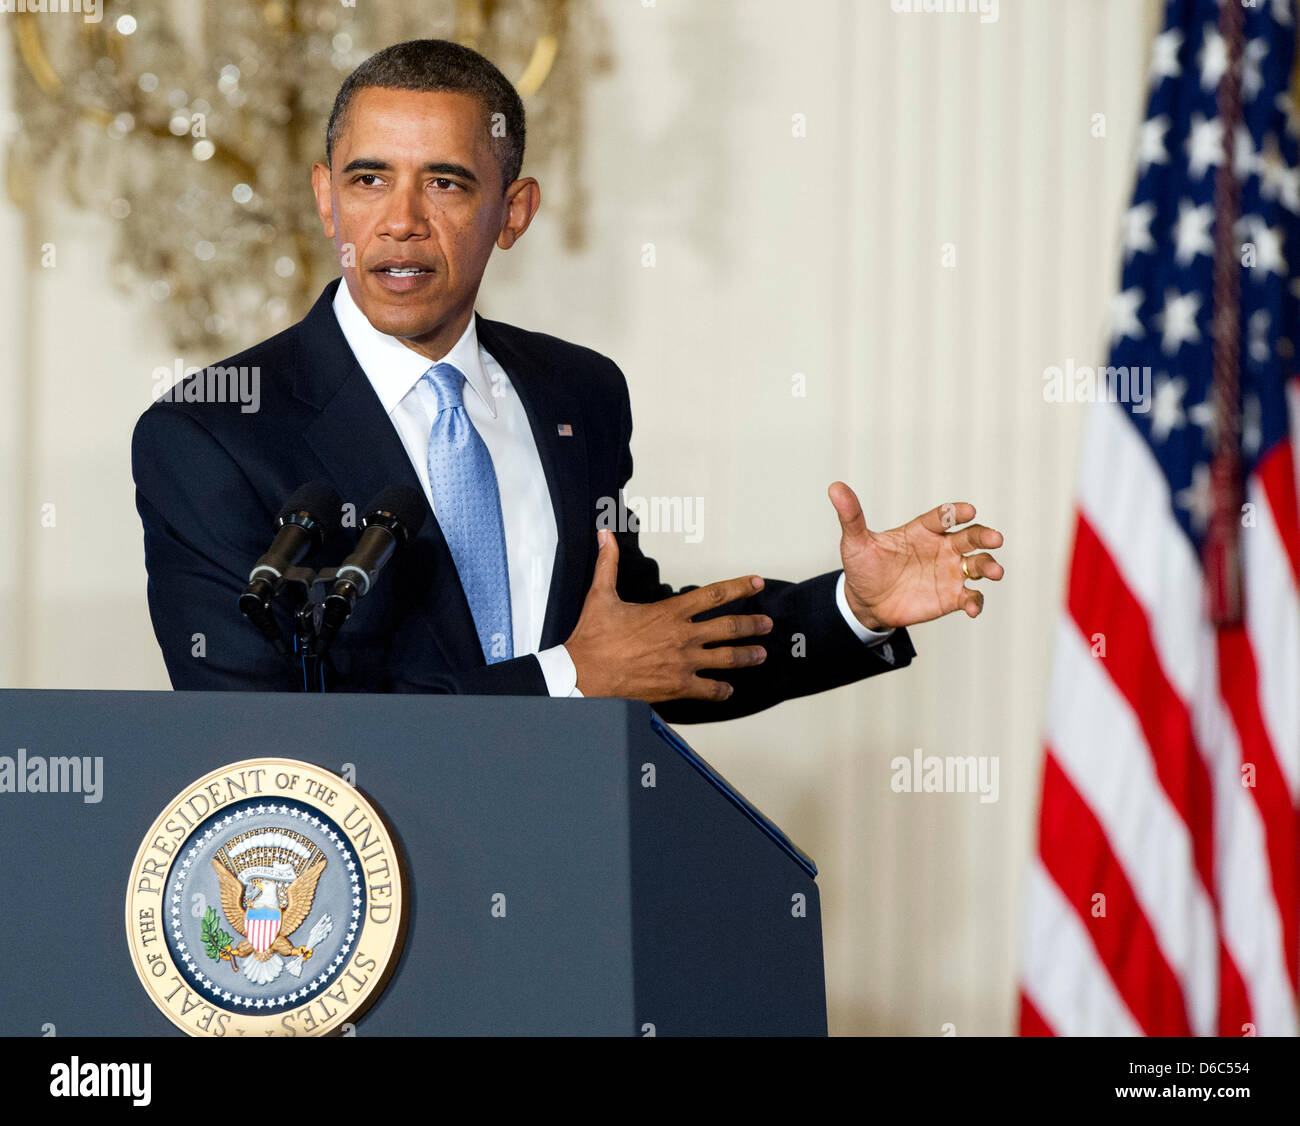 United States President Barack Obama makes remarks in the East Room of the White House in Washington, D.C. calling on Congress to return powers that would allow him to reform Executive Branch agencies of the U.S. Government..Credit: Ron Sachs / CNP Stock Photo